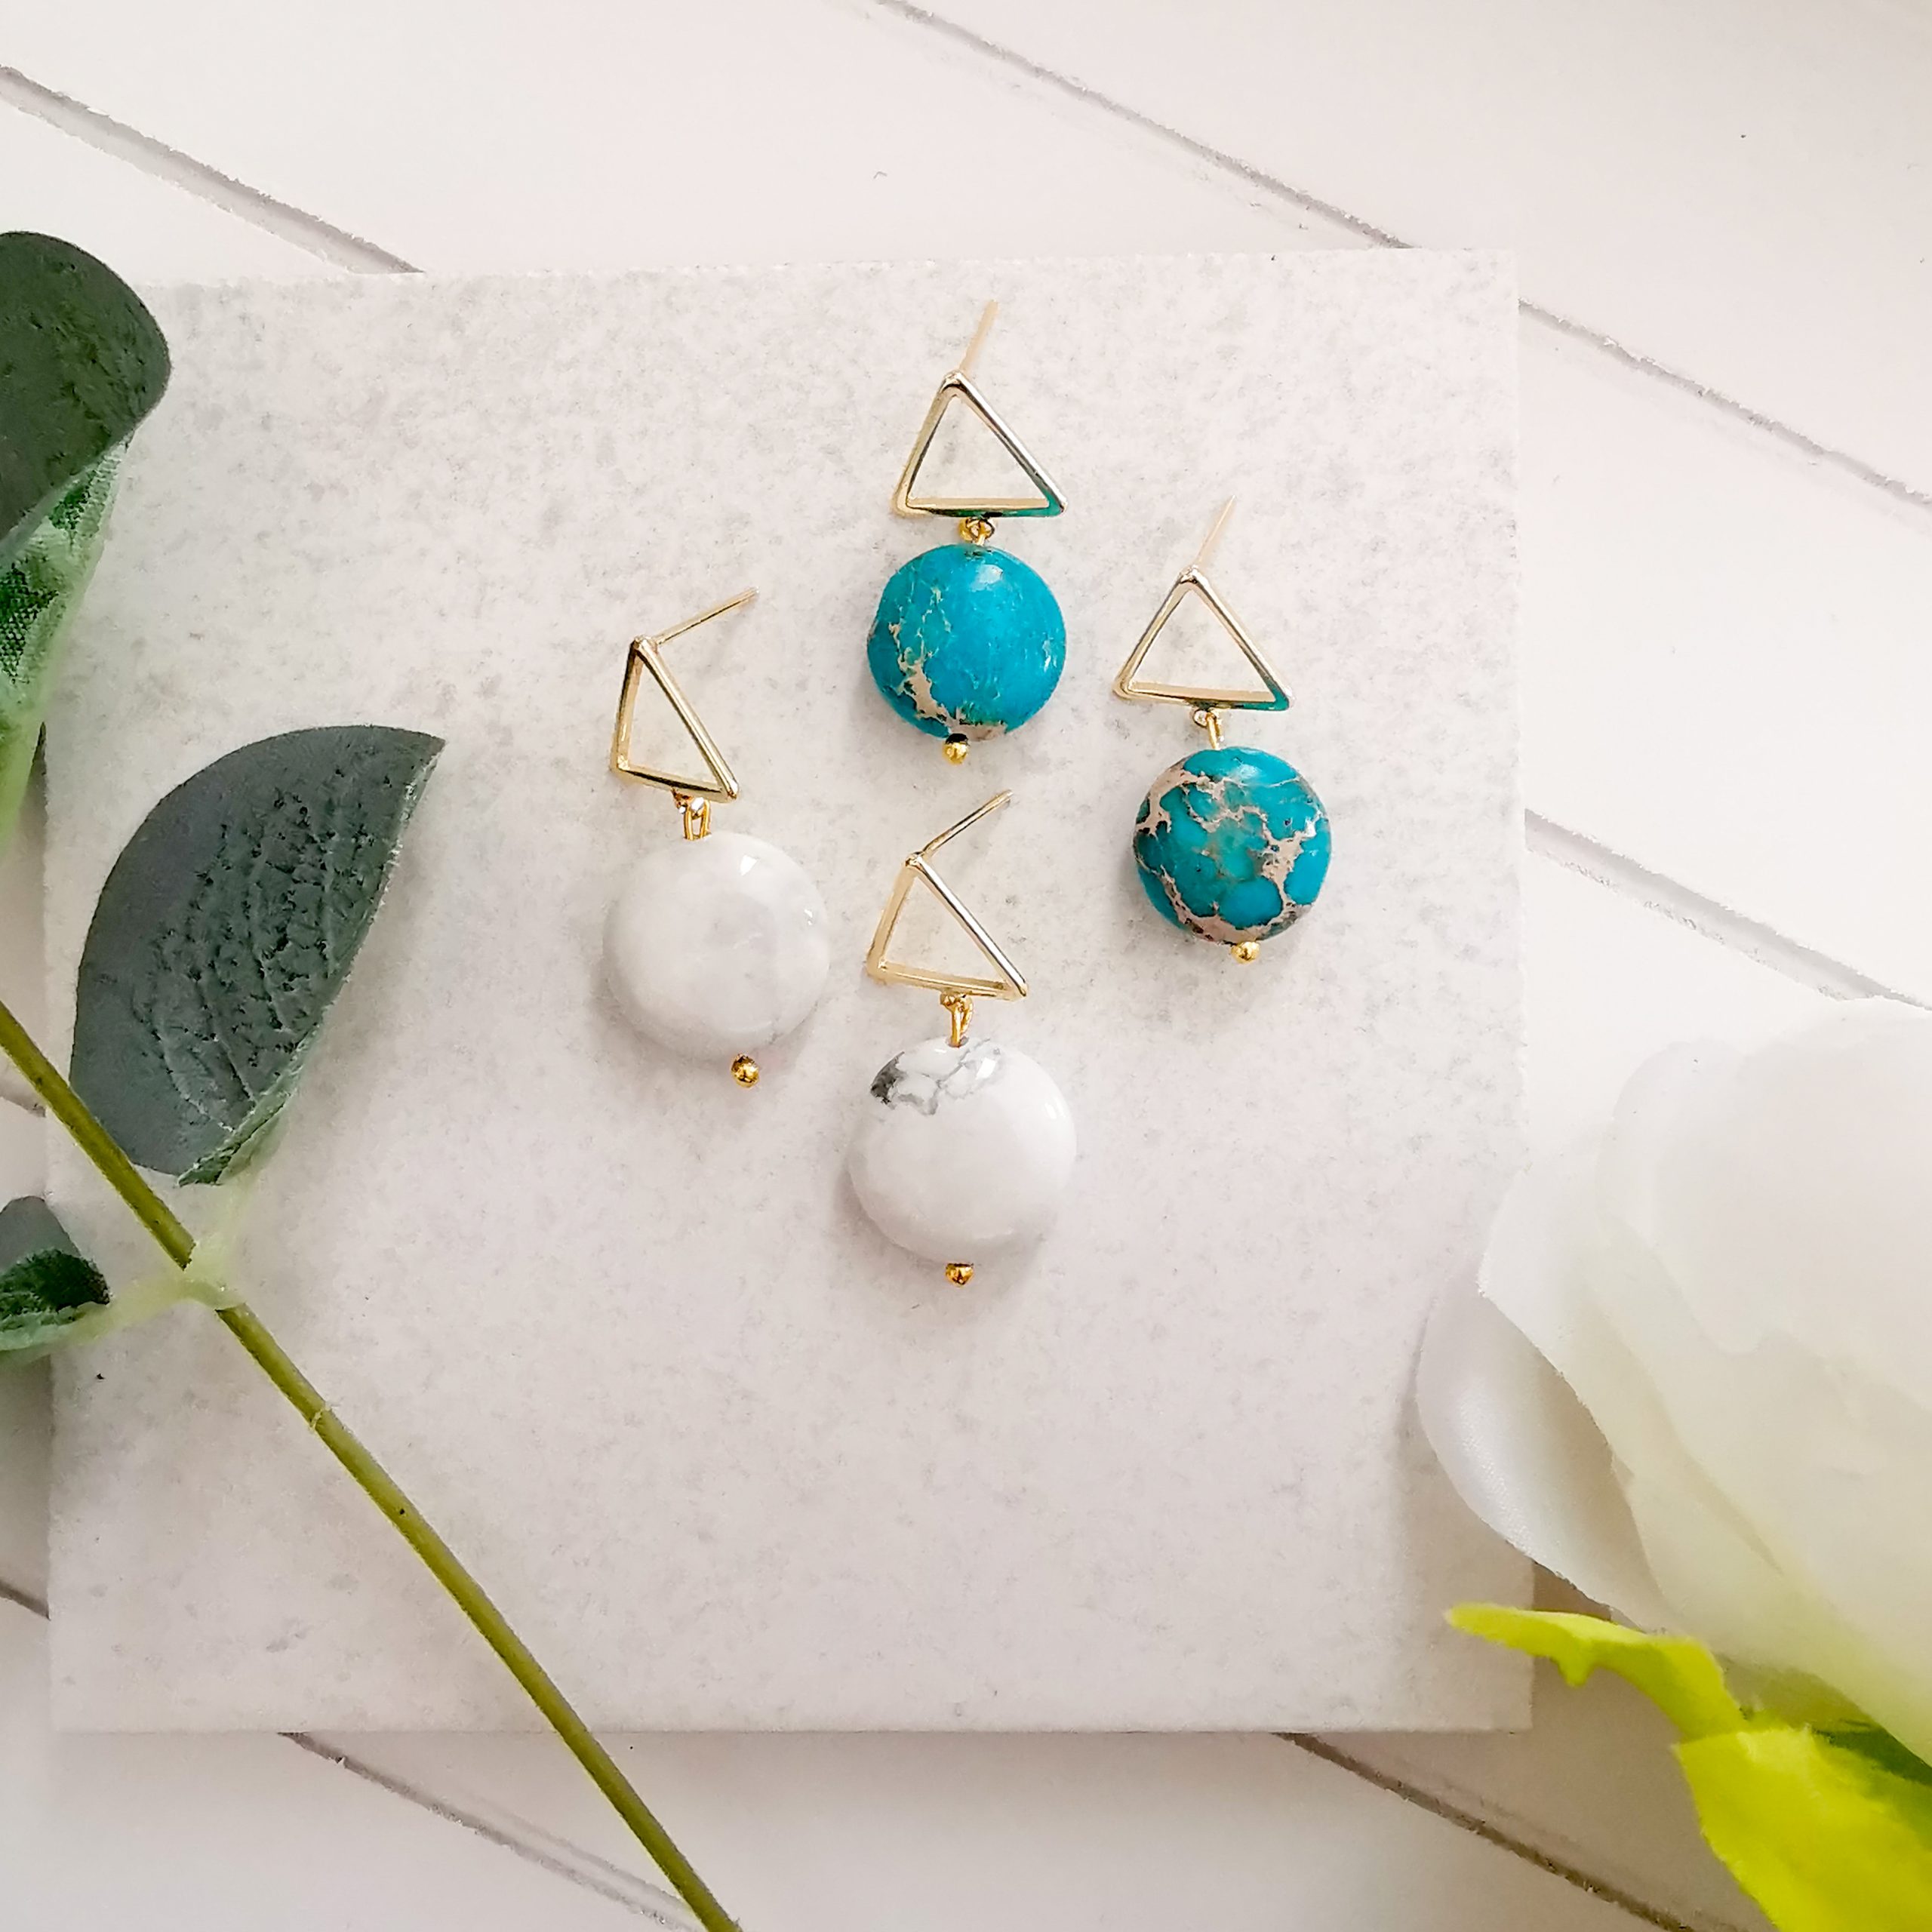 AccentsUK 18K Gold Plated White Marble Stone Earrings